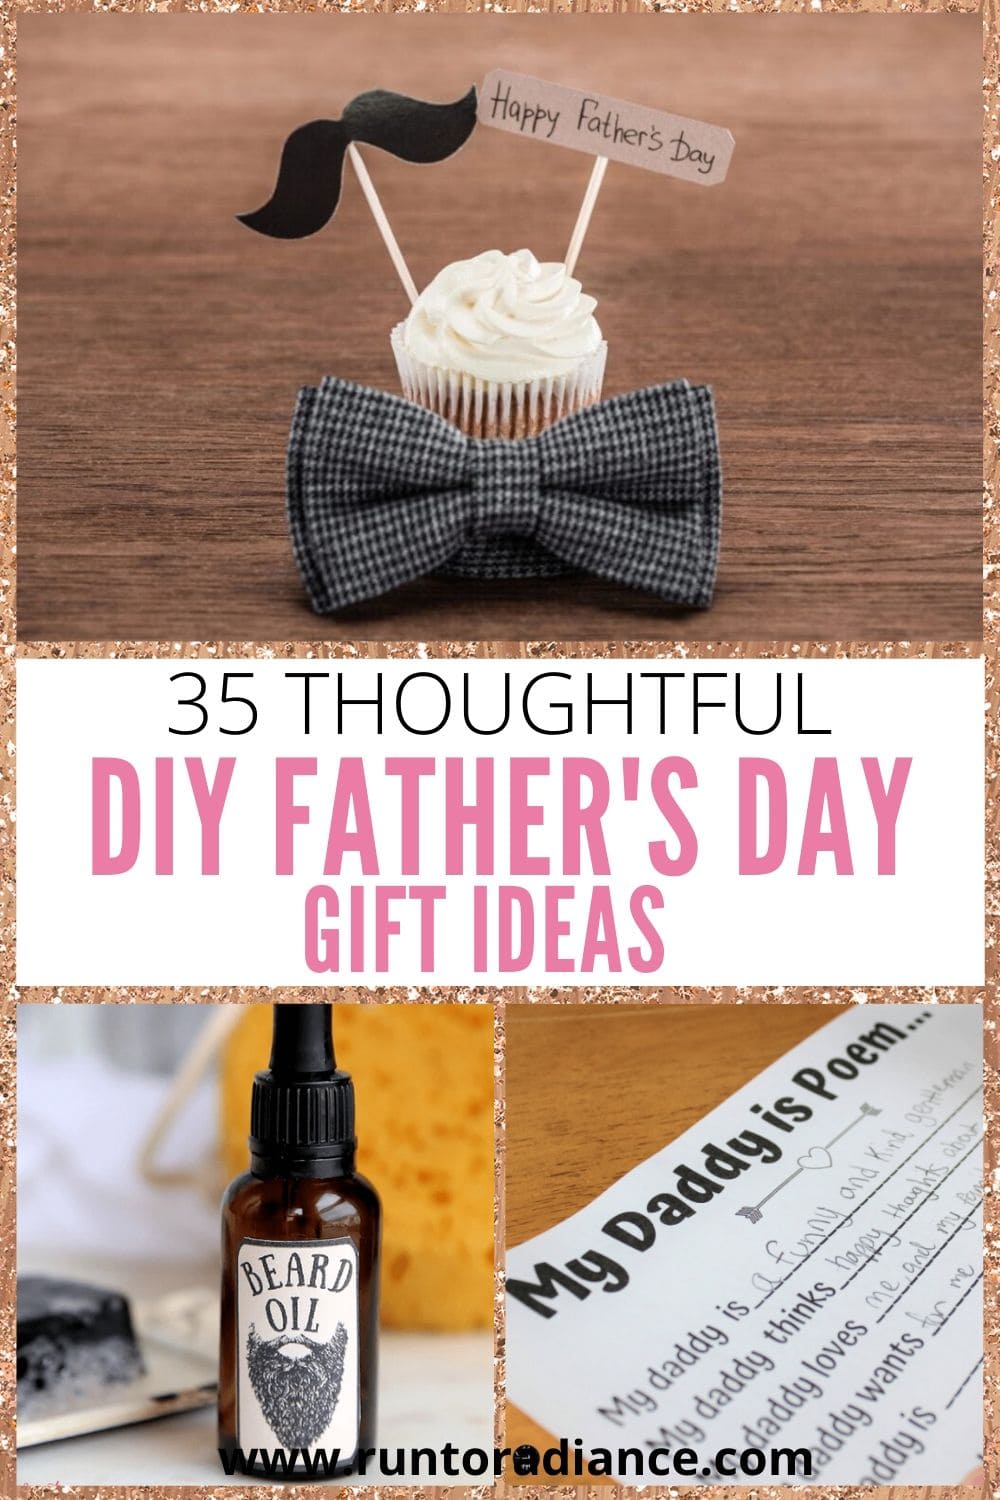 35+ Most Thoughtful DIY Father's Day Gifts Run To Radiance